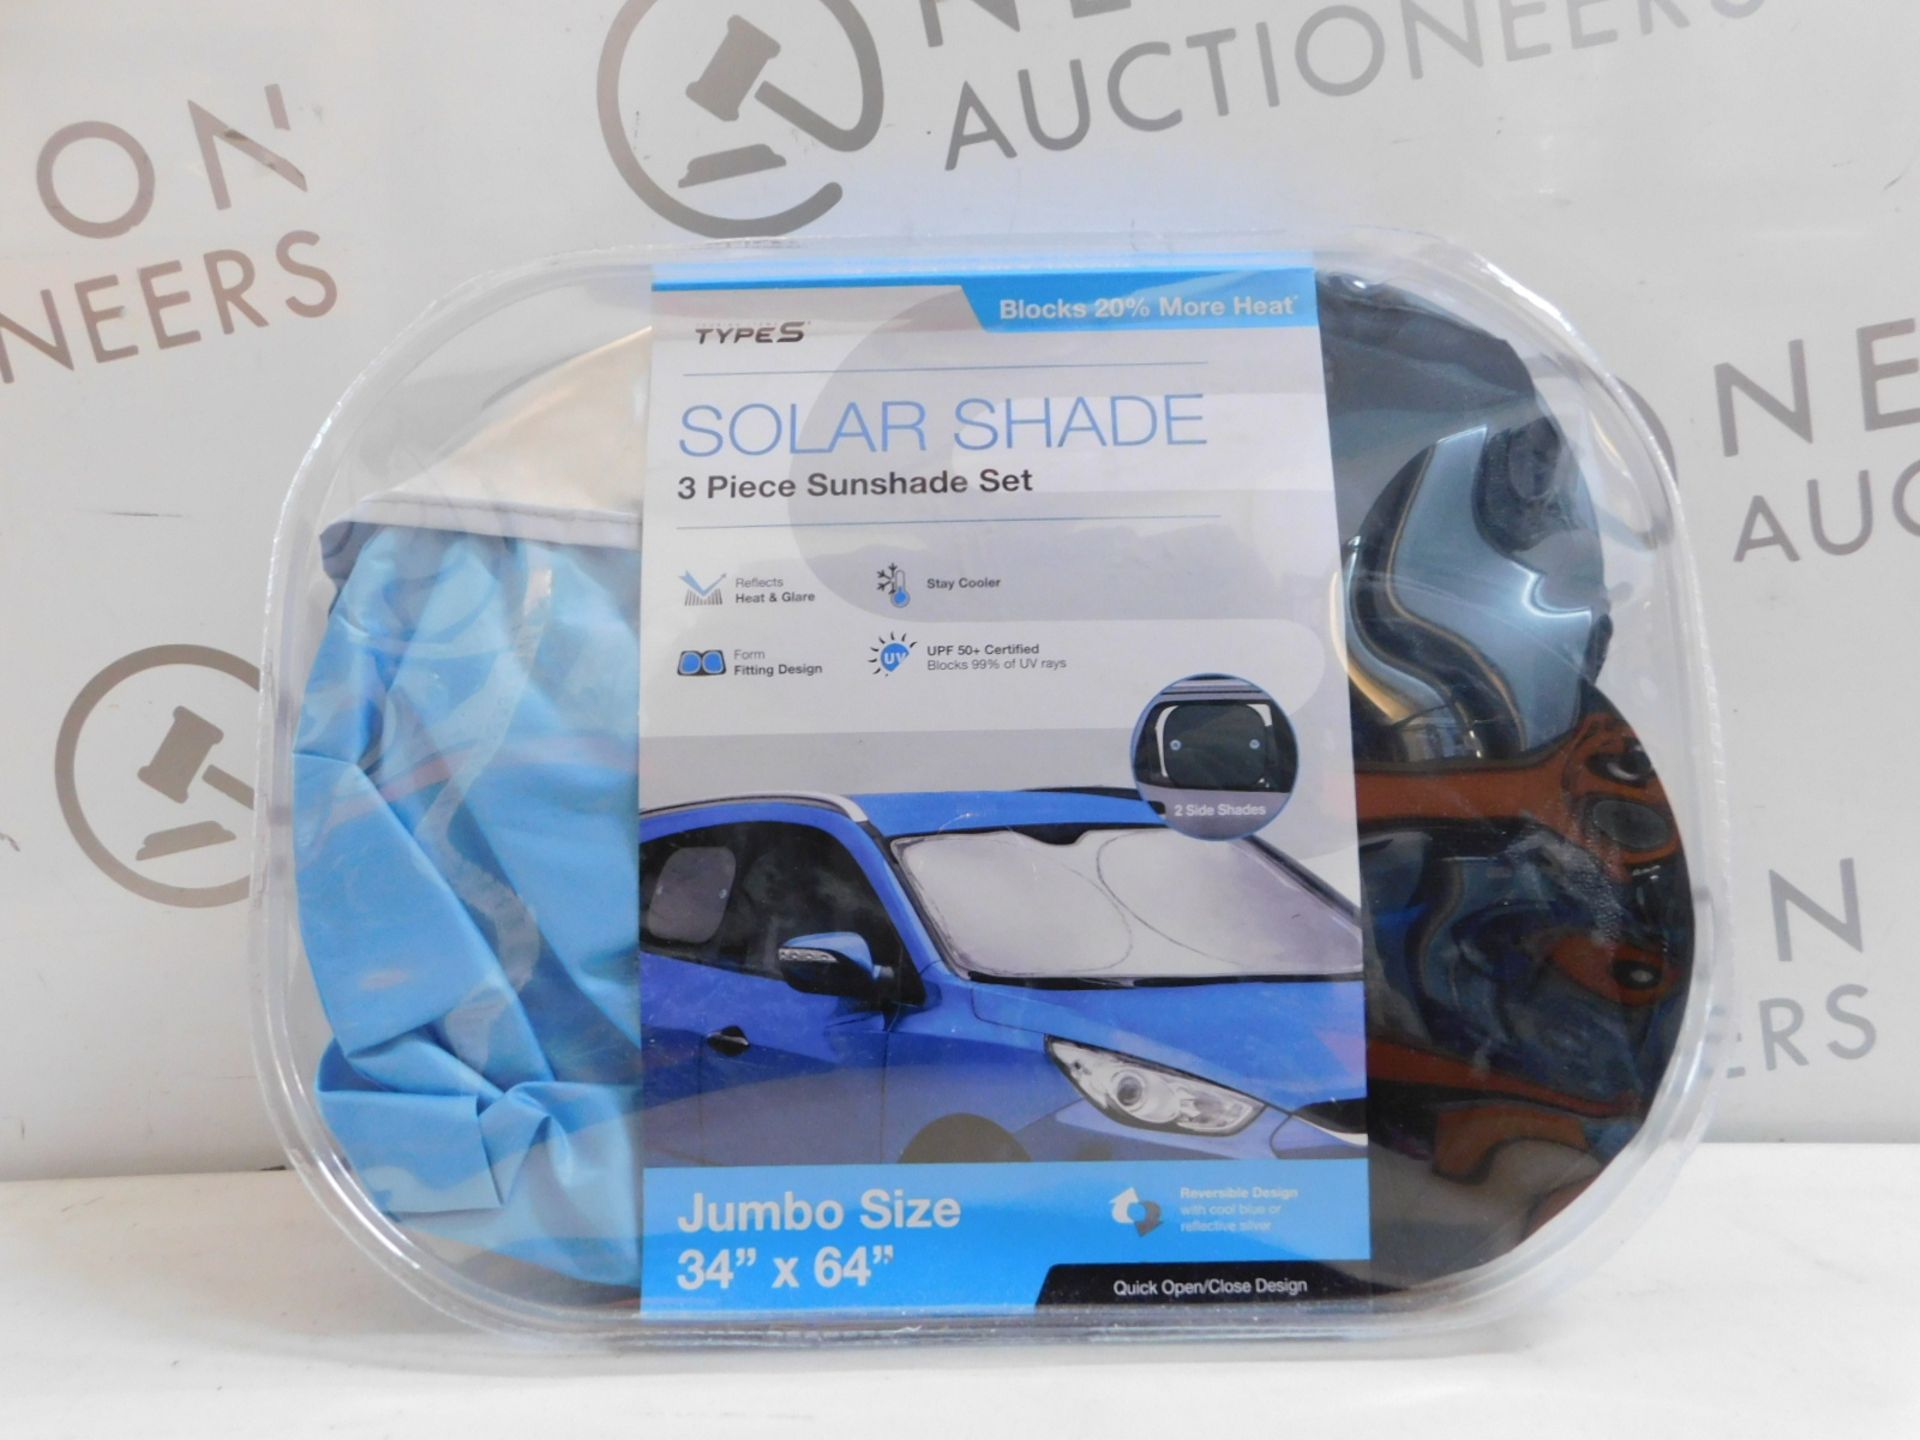 1 BRAND NEW PACK OF TYPE-S SOLAR SHADE 3 PIECE SUNSHADE SET RRP Â£29.99